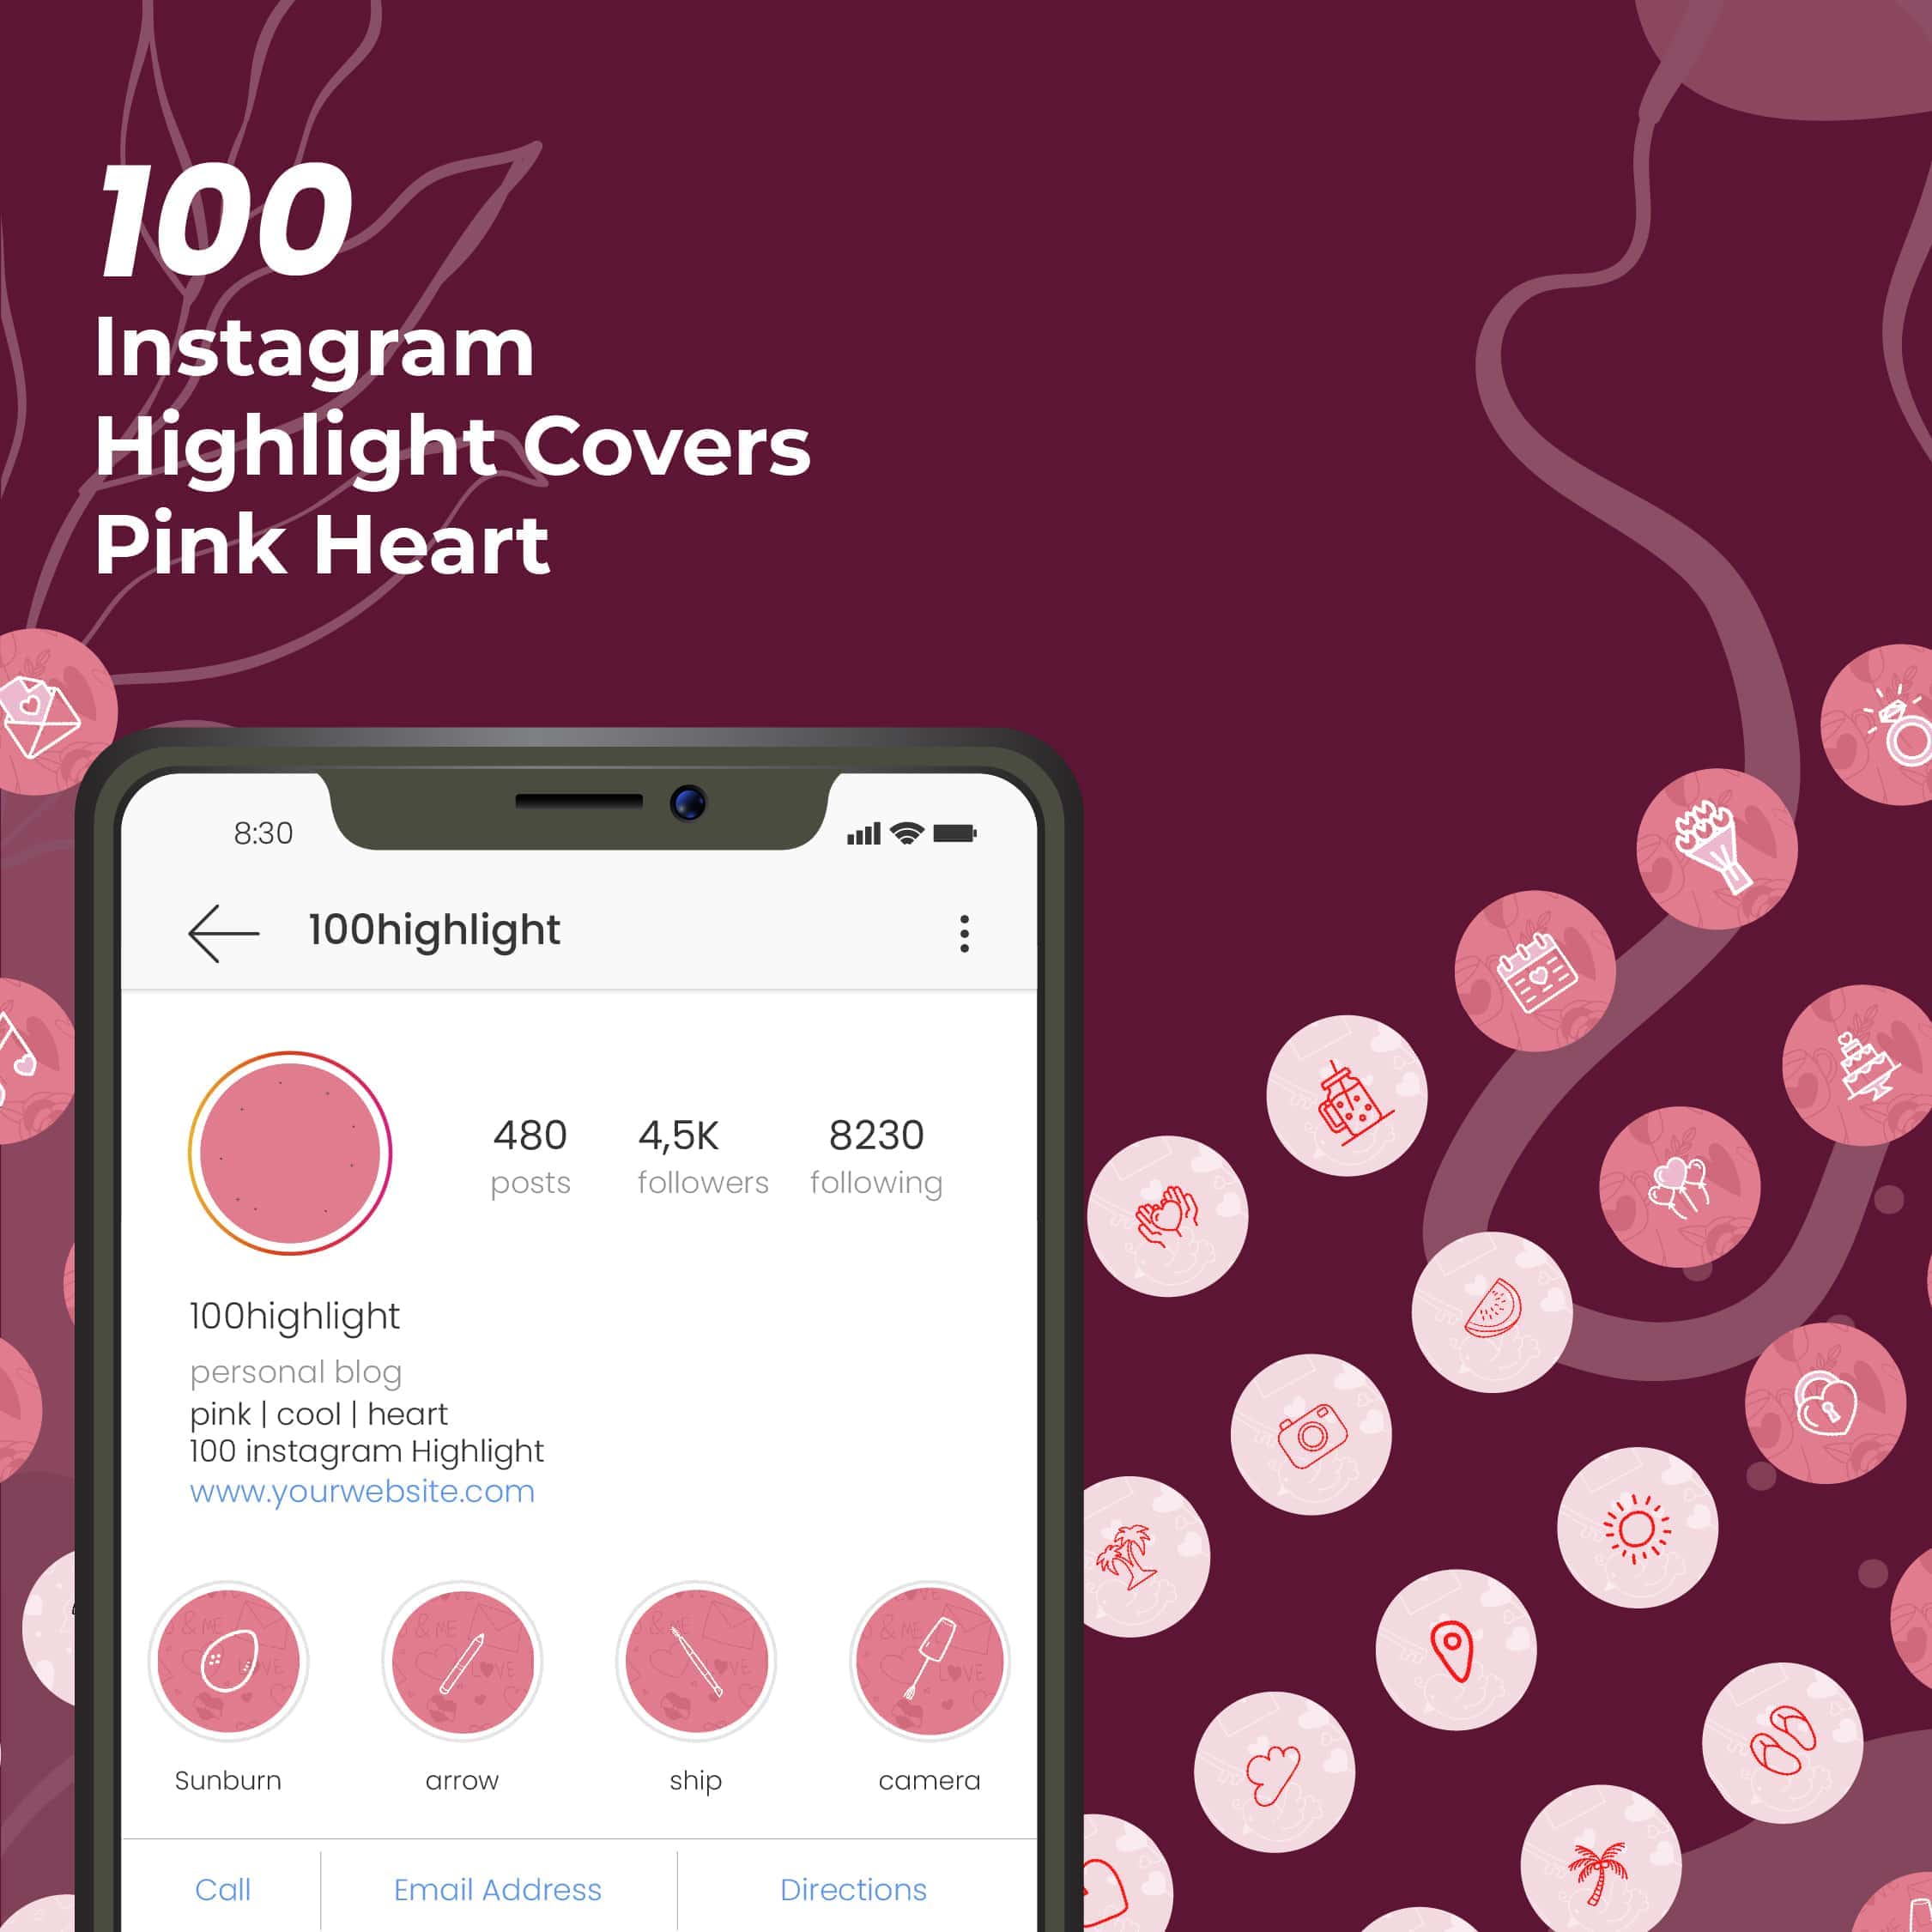 instagram highlight covers pink heart for self care